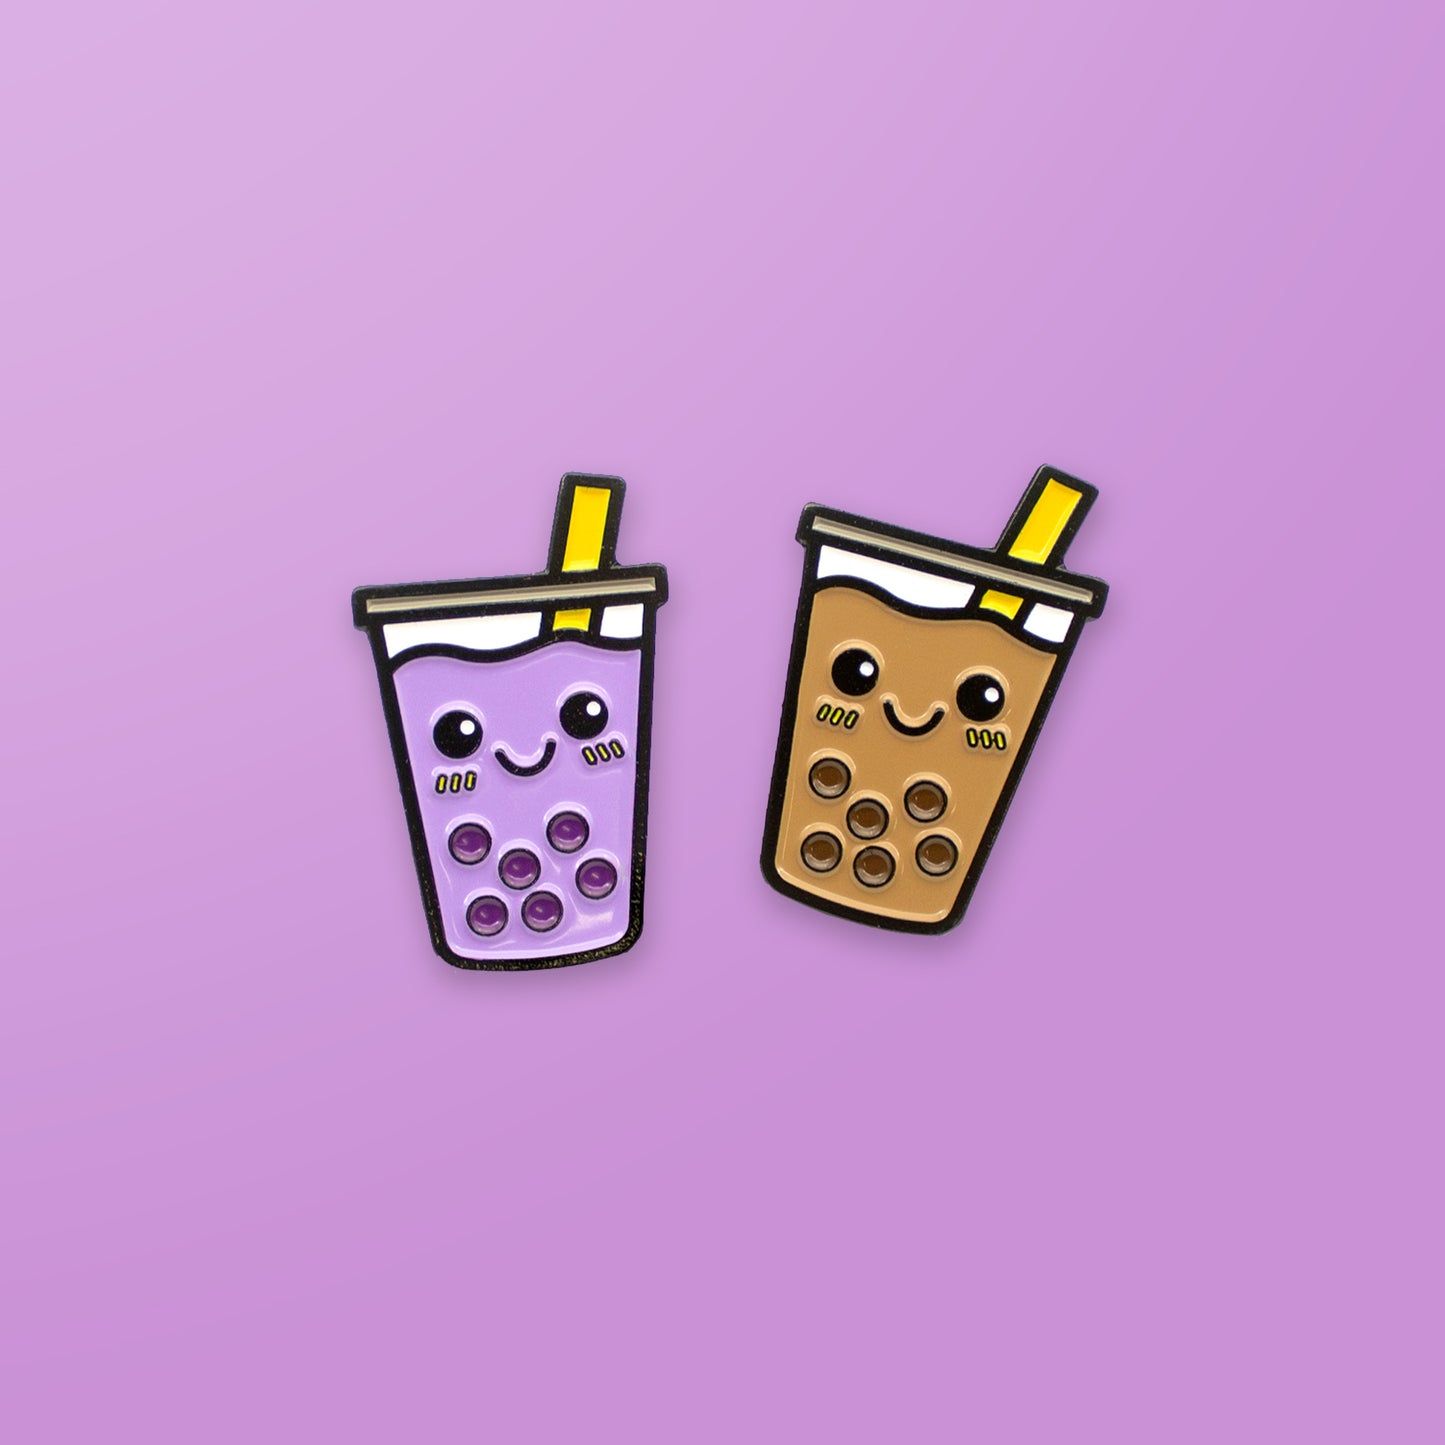 Two boba drinks with straw and a purple background - Boba